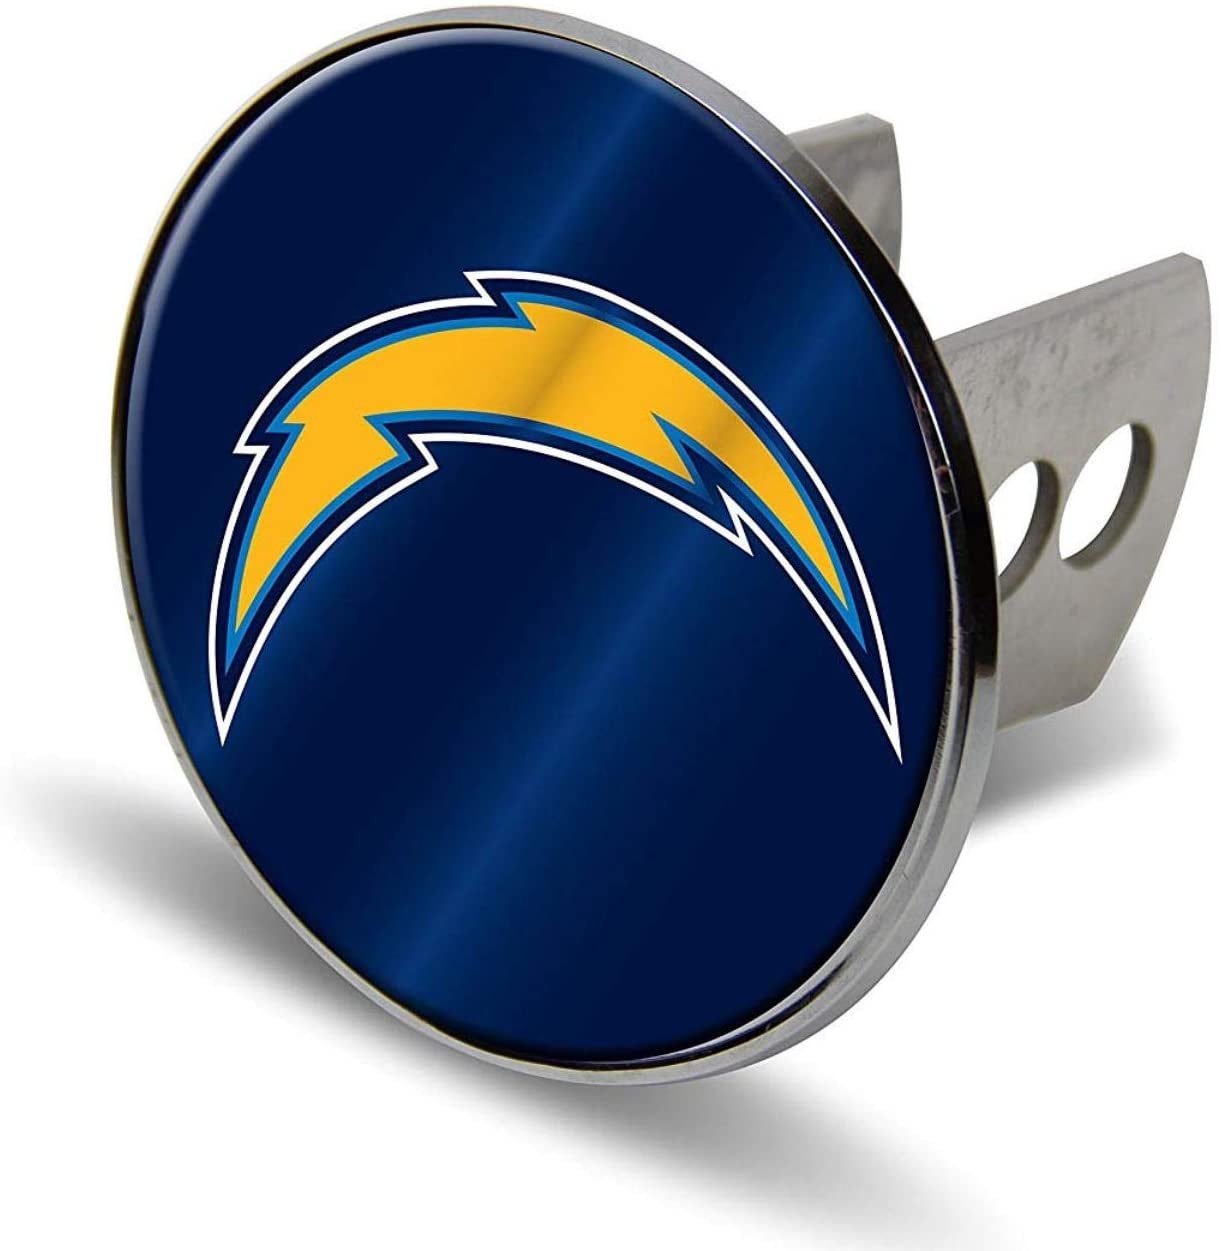 Los Angeles Chargers Metal Hitch Cover with Laser Cut Mirrored Acrylic Insert for 2 Inch Receiver